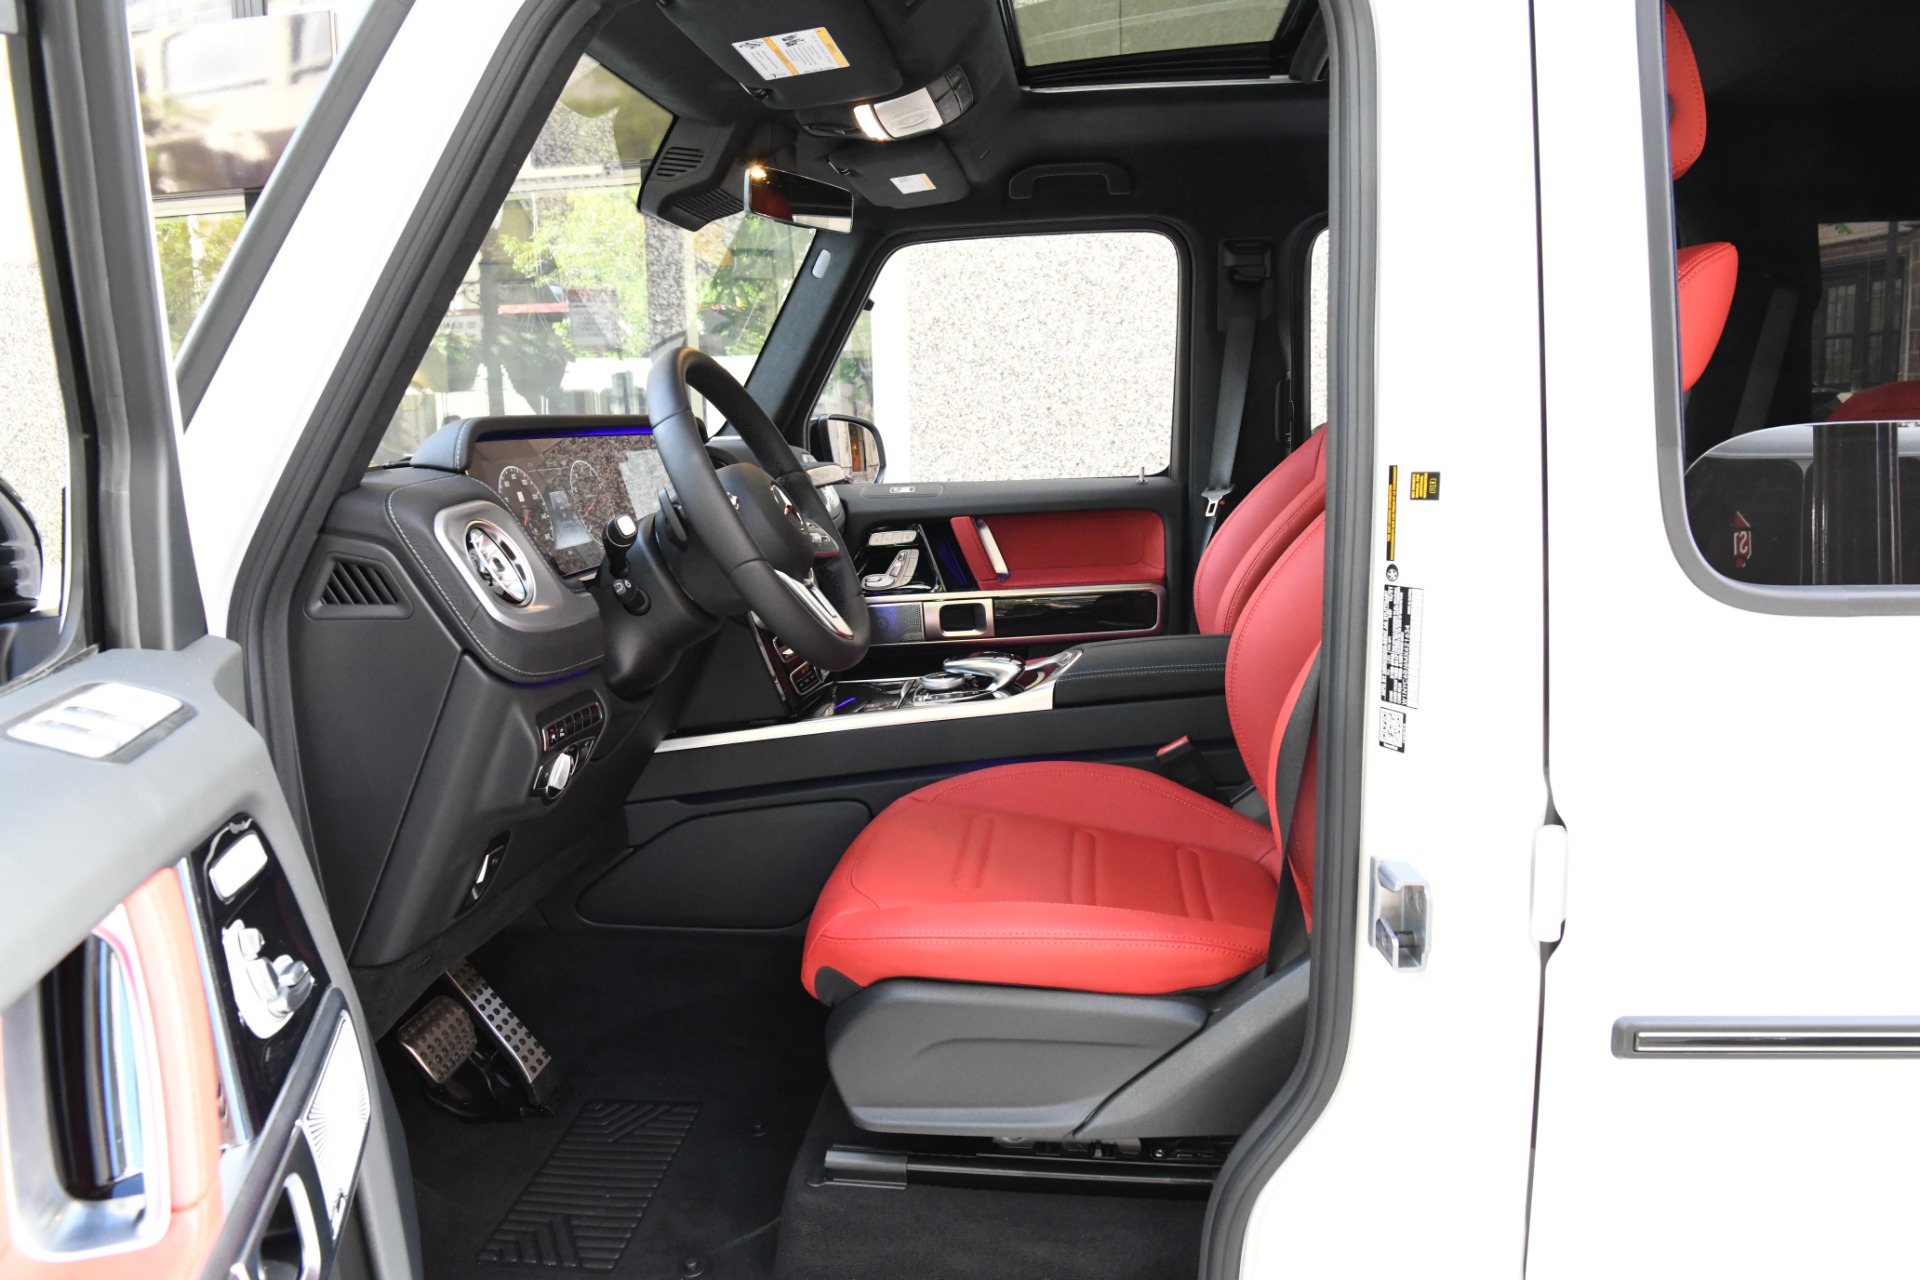 Used 2021 MERCEDES-BENZ G-Class G550 | Chicago, IL